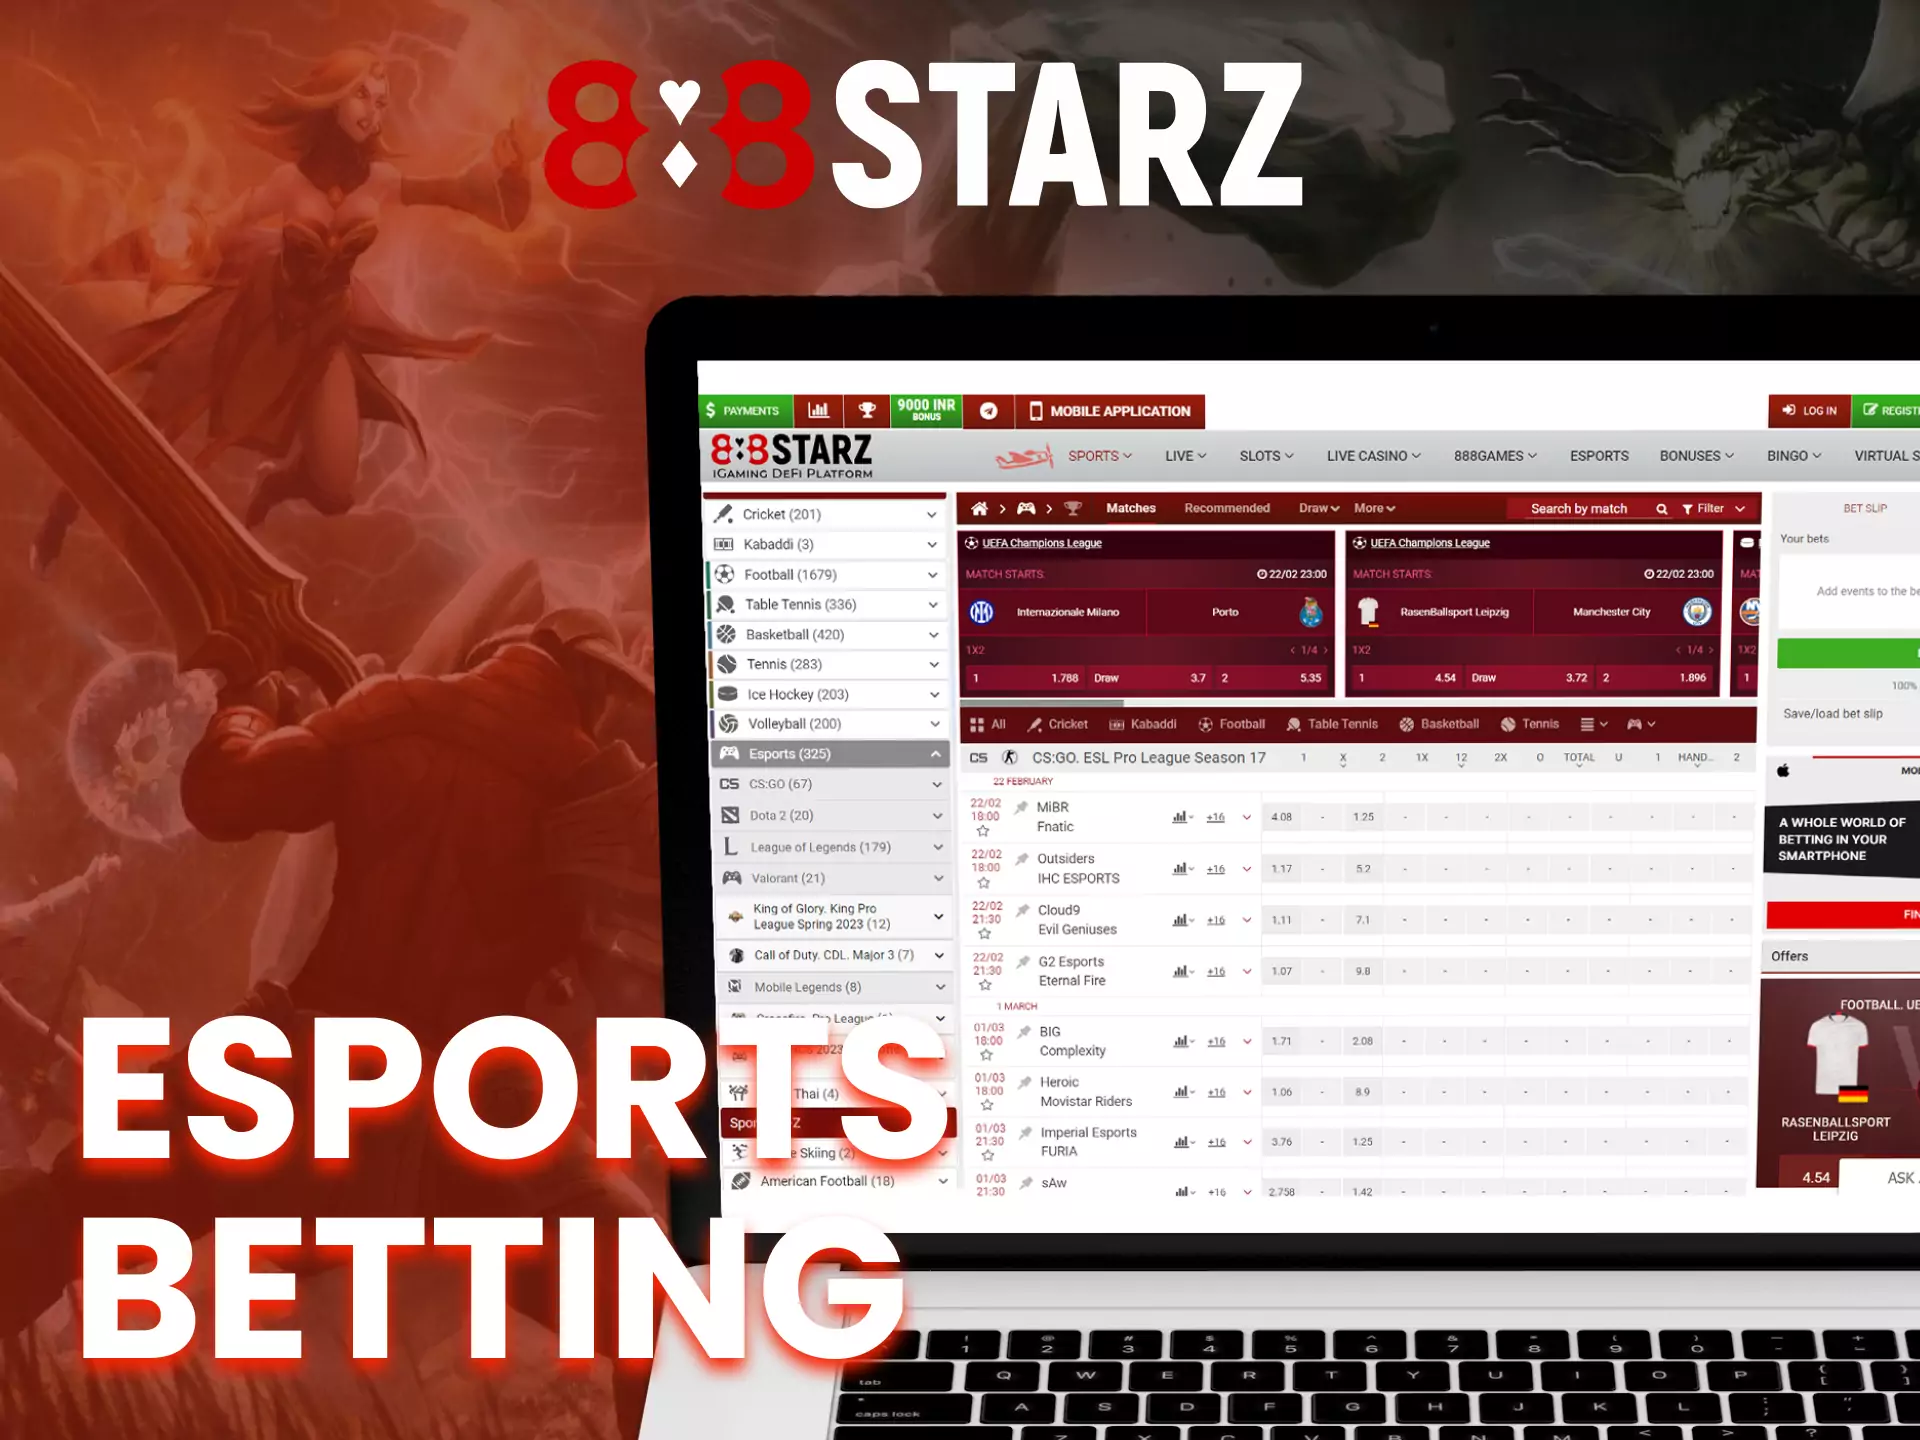 Bet on your favourite esports teams at 888starz and win money.